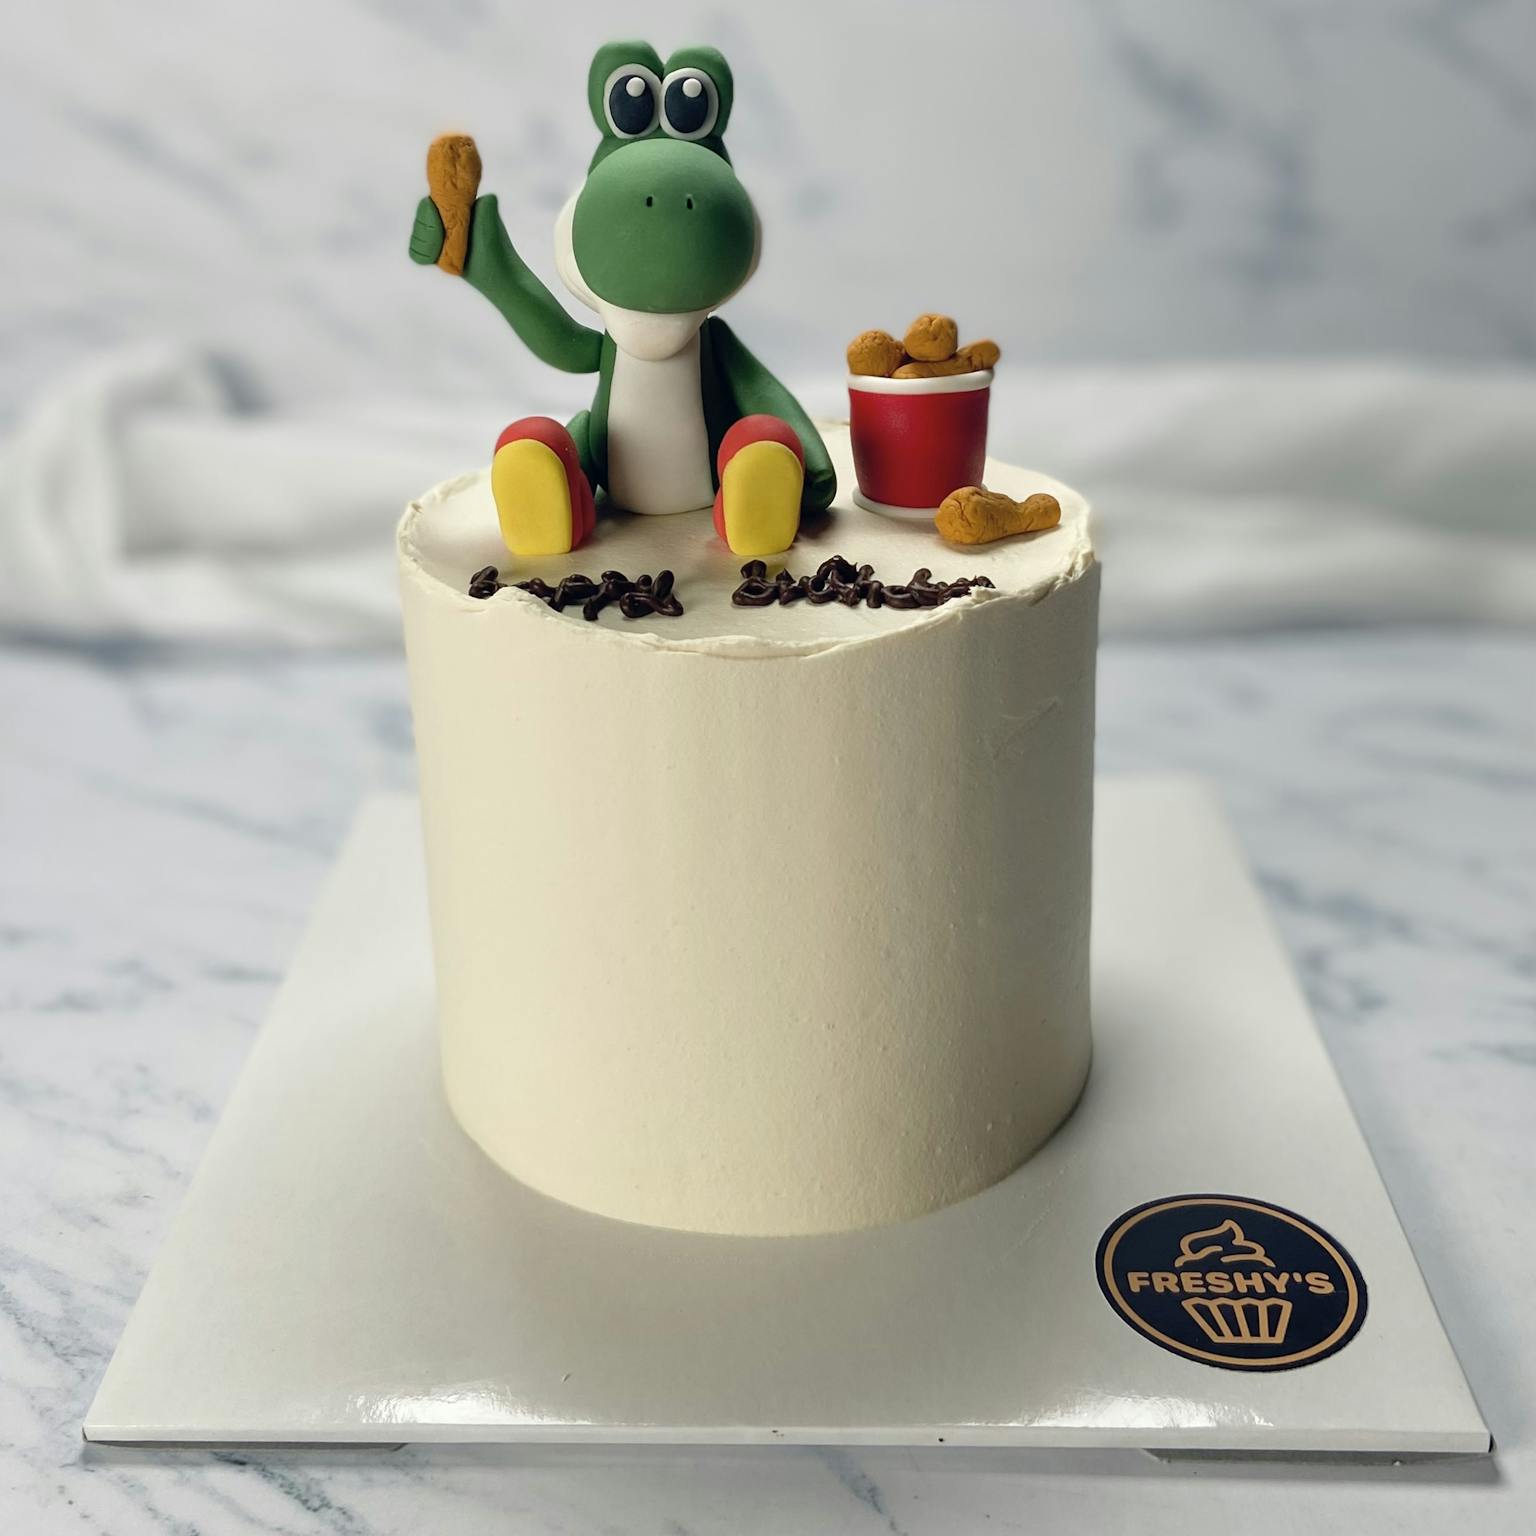 100% edible fondant sculpted Yoshi and chicken cake